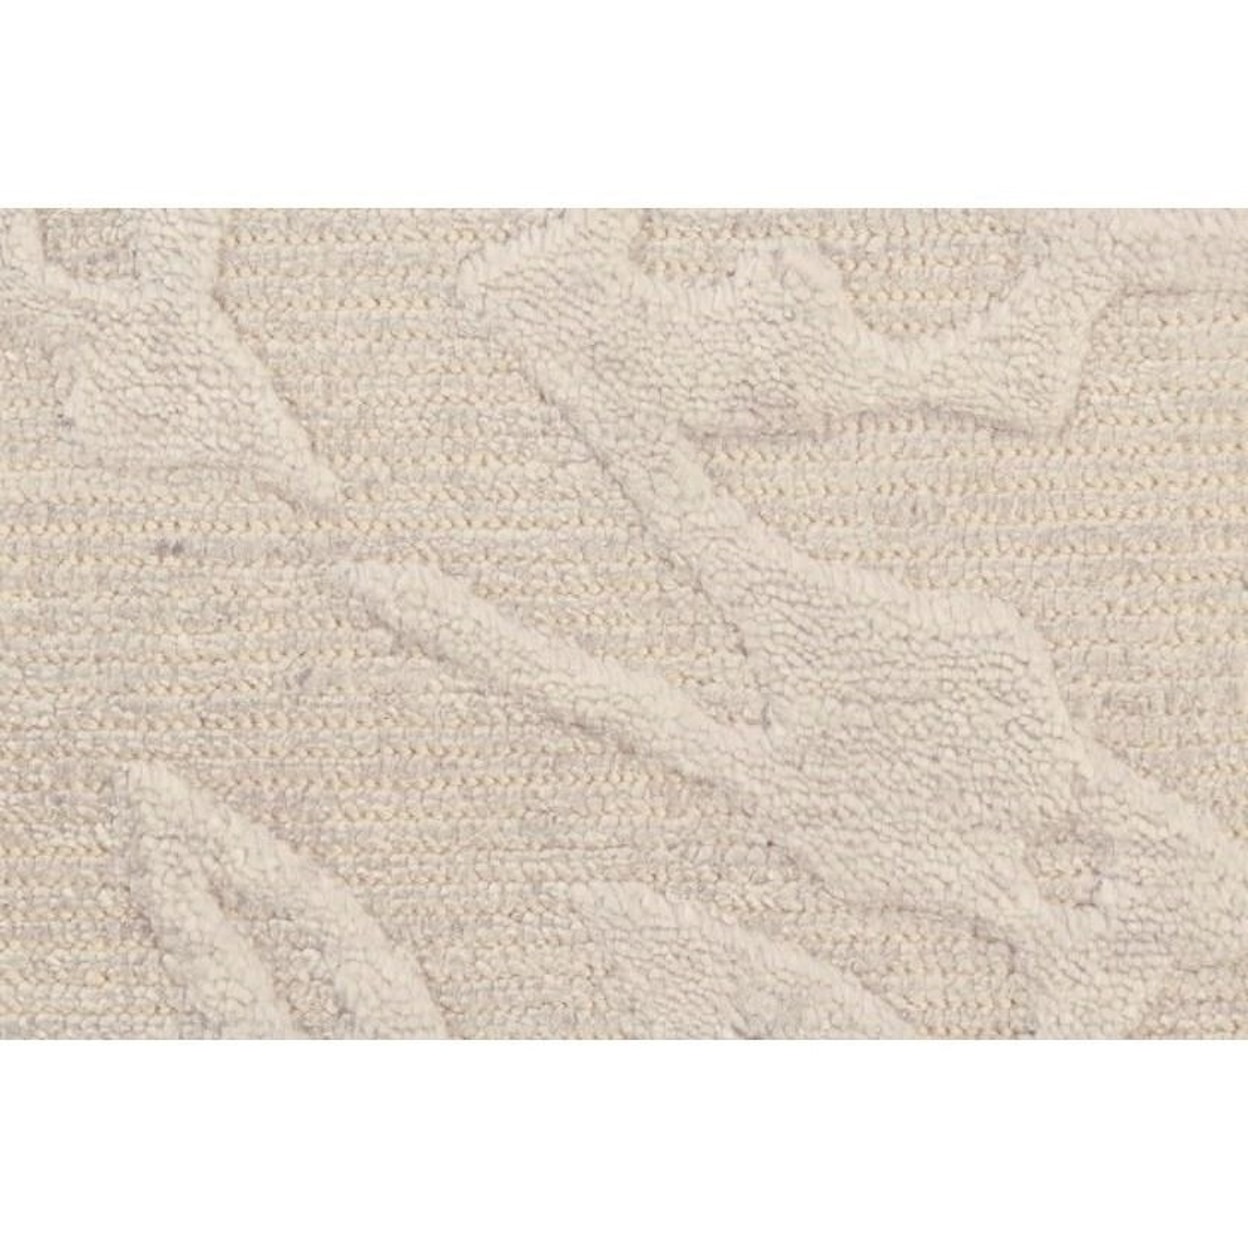 Feizy Rugs Leilani Cashmere 9'-6" x 13'-6" Area Rug